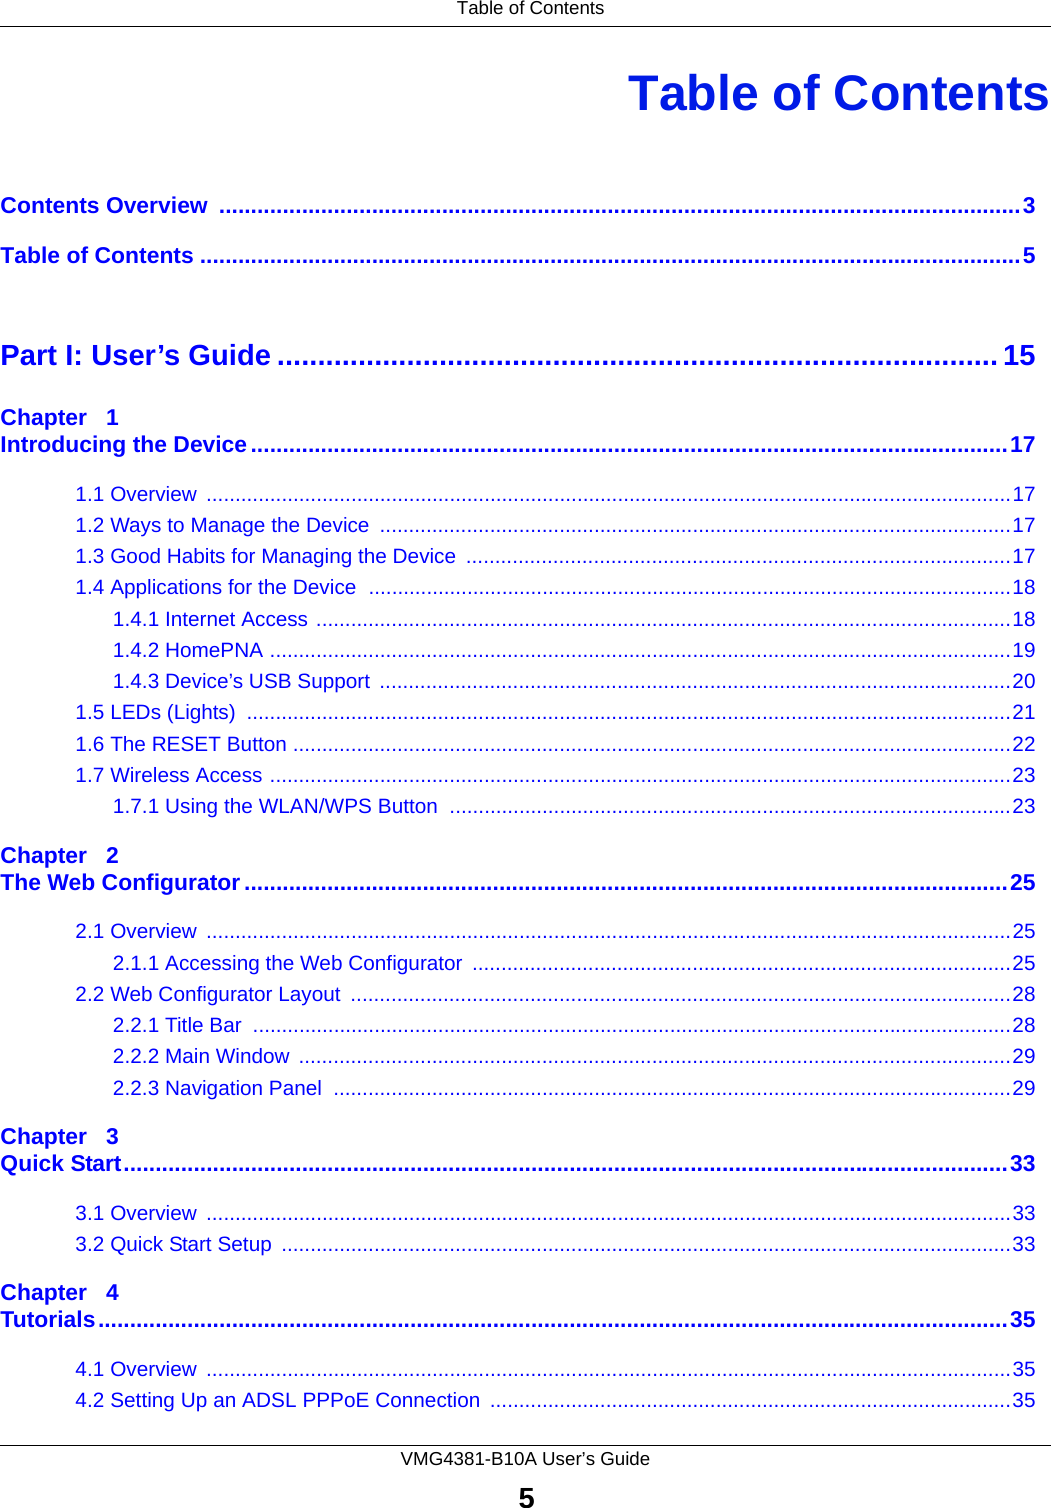  Table of ContentsVMG4381-B10A User’s Guide5Table of ContentsContents Overview  ..............................................................................................................................3Table of Contents .................................................................................................................................5Part I: User’s Guide ......................................................................................... 15Chapter   1Introducing the Device.......................................................................................................................171.1 Overview  ...........................................................................................................................................171.2 Ways to Manage the Device  .............................................................................................................171.3 Good Habits for Managing the Device  ..............................................................................................171.4 Applications for the Device  ...............................................................................................................181.4.1 Internet Access ........................................................................................................................181.4.2 HomePNA ................................................................................................................................191.4.3 Device’s USB Support  .............................................................................................................201.5 LEDs (Lights)  ....................................................................................................................................211.6 The RESET Button ............................................................................................................................221.7 Wireless Access ................................................................................................................................231.7.1 Using the WLAN/WPS Button  .................................................................................................23Chapter   2The Web Configurator........................................................................................................................252.1 Overview  ...........................................................................................................................................252.1.1 Accessing the Web Configurator  .............................................................................................252.2 Web Configurator Layout  ..................................................................................................................282.2.1 Title Bar  ...................................................................................................................................282.2.2 Main Window  ...........................................................................................................................292.2.3 Navigation Panel  .....................................................................................................................29Chapter   3Quick Start...........................................................................................................................................333.1 Overview  ...........................................................................................................................................333.2 Quick Start Setup  ..............................................................................................................................33Chapter   4Tutorials...............................................................................................................................................354.1 Overview  ...........................................................................................................................................354.2 Setting Up an ADSL PPPoE Connection ..........................................................................................35